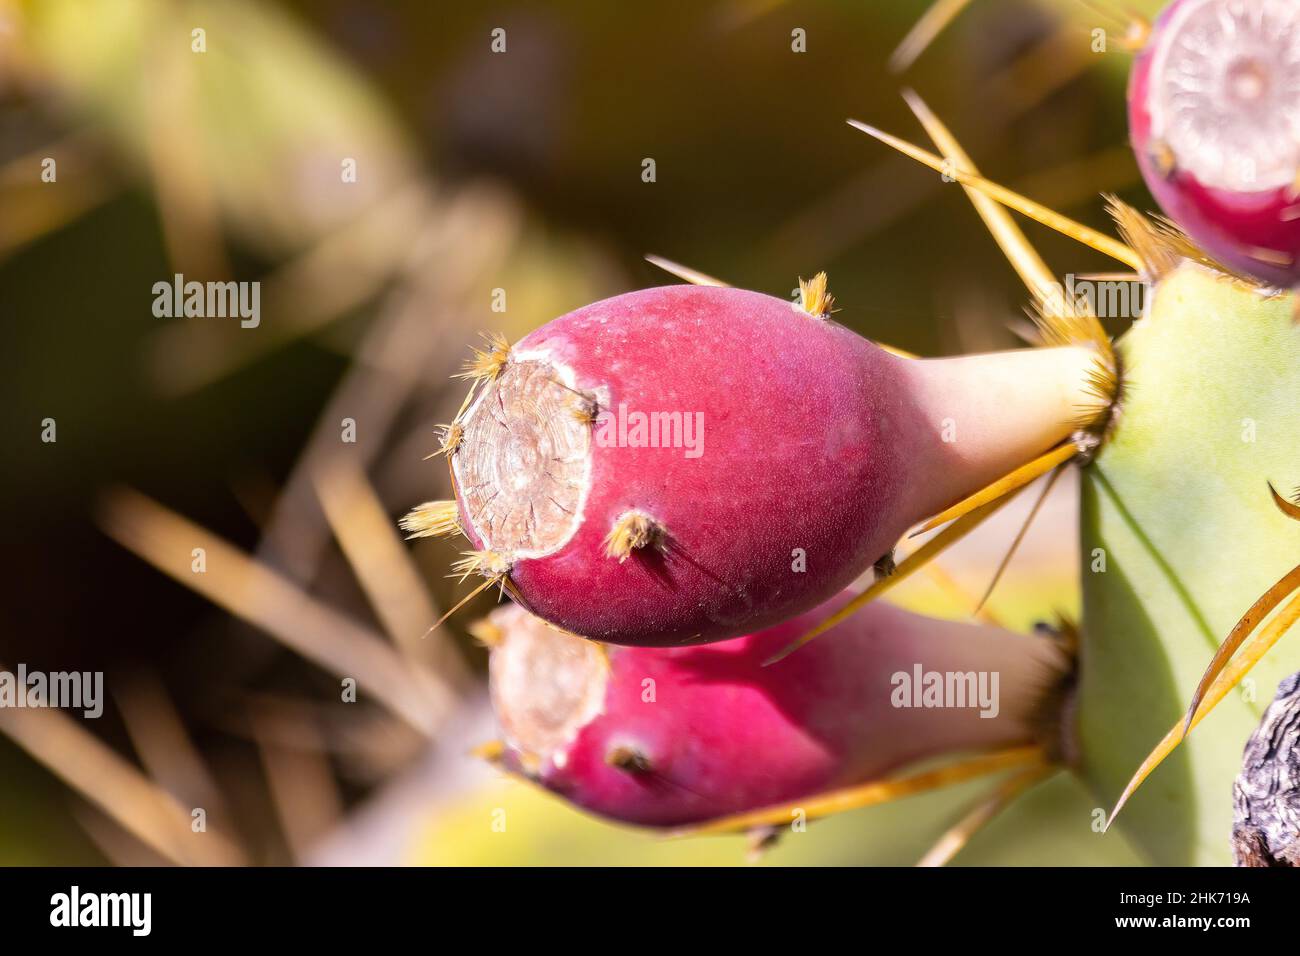 Ripe red fruits of Opuntia cactus, commonly called prickly pear or pear cactus Stock Photo